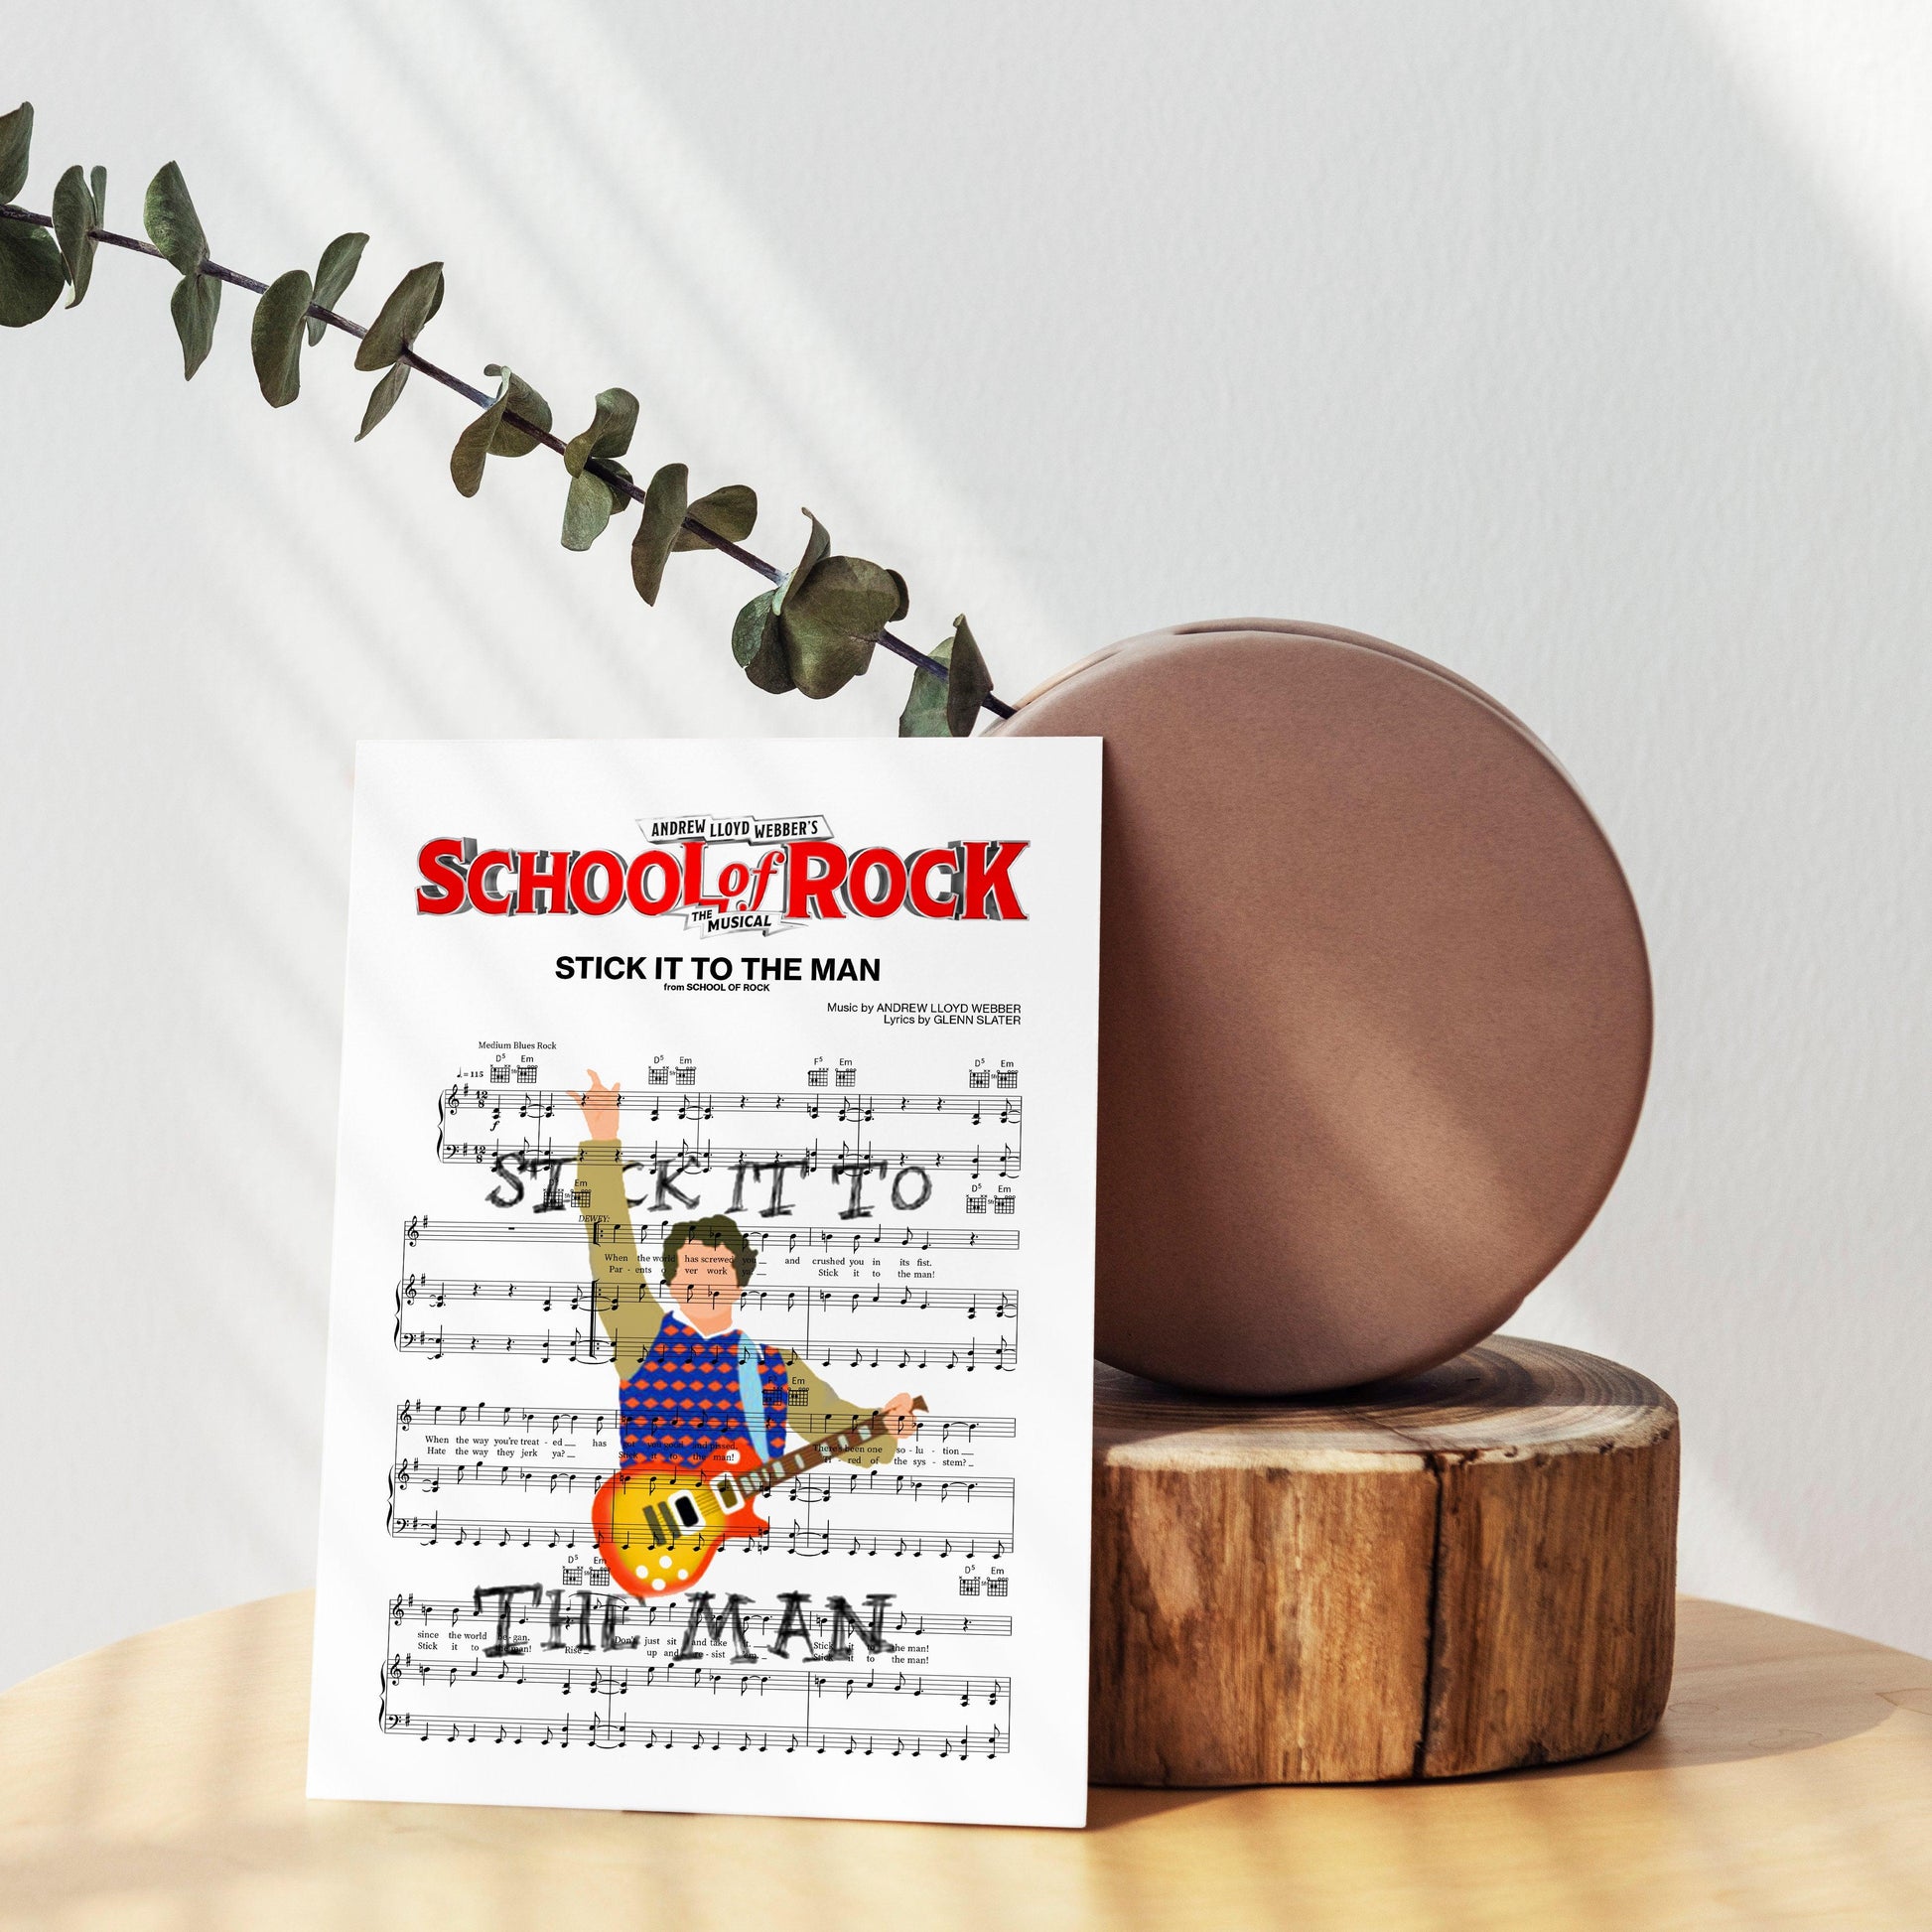 Looking for some new music-inspired wall art? Check out our newest poster, featuring the School of Rock.This print is simple but eye-catching, and would be perfect for any music lover's home. Plus, it's printed on high-quality paper, so the colors will stay bright for years to come.What's not to love about this poster? It's a great way to show your love for music while also adding some personality to your home. Hang it in your kitchen or dining room and rock out while you cook or eat!